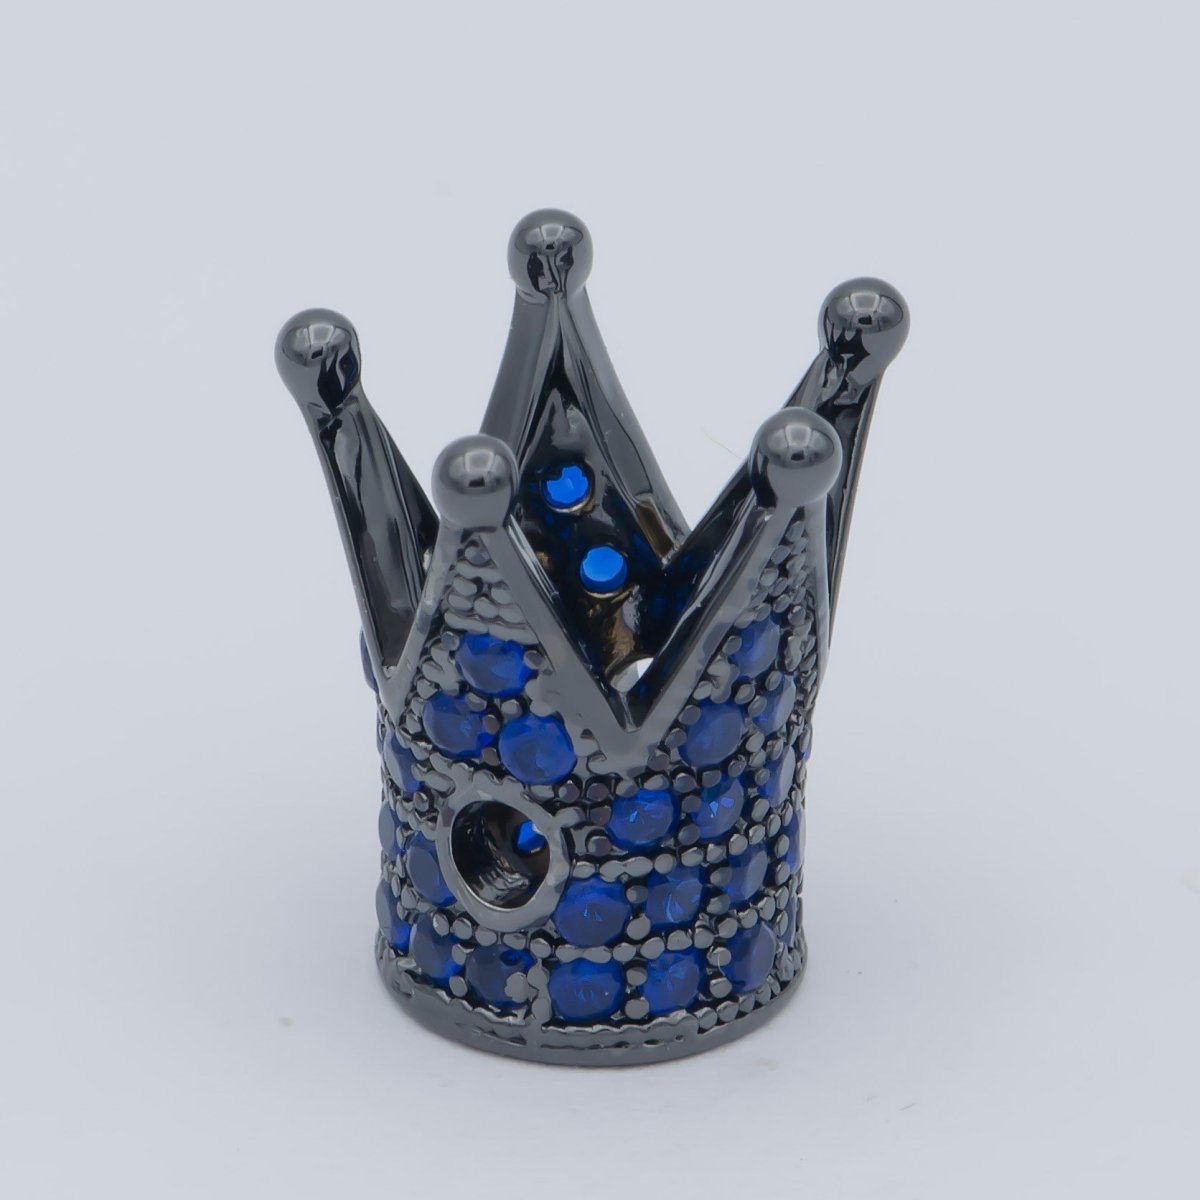 Mini Black Silver Gold Crown Beads with CZ Blue Crystal Small Simple King Queen Crown Model Jewelry Making Beads B-212, B-564, B-565 - DLUXCA